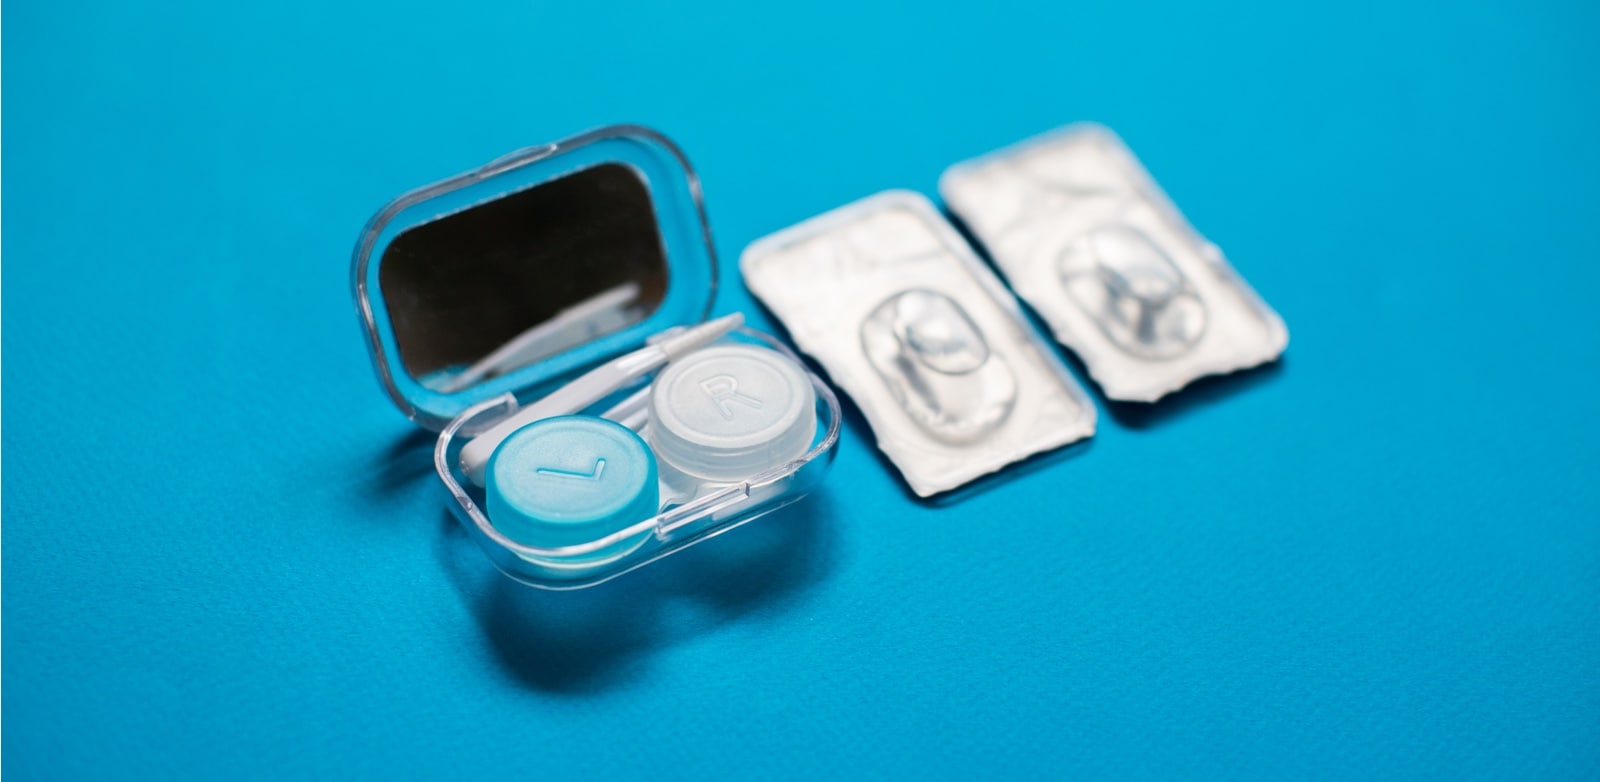 Contact lenses types: everything you need to know